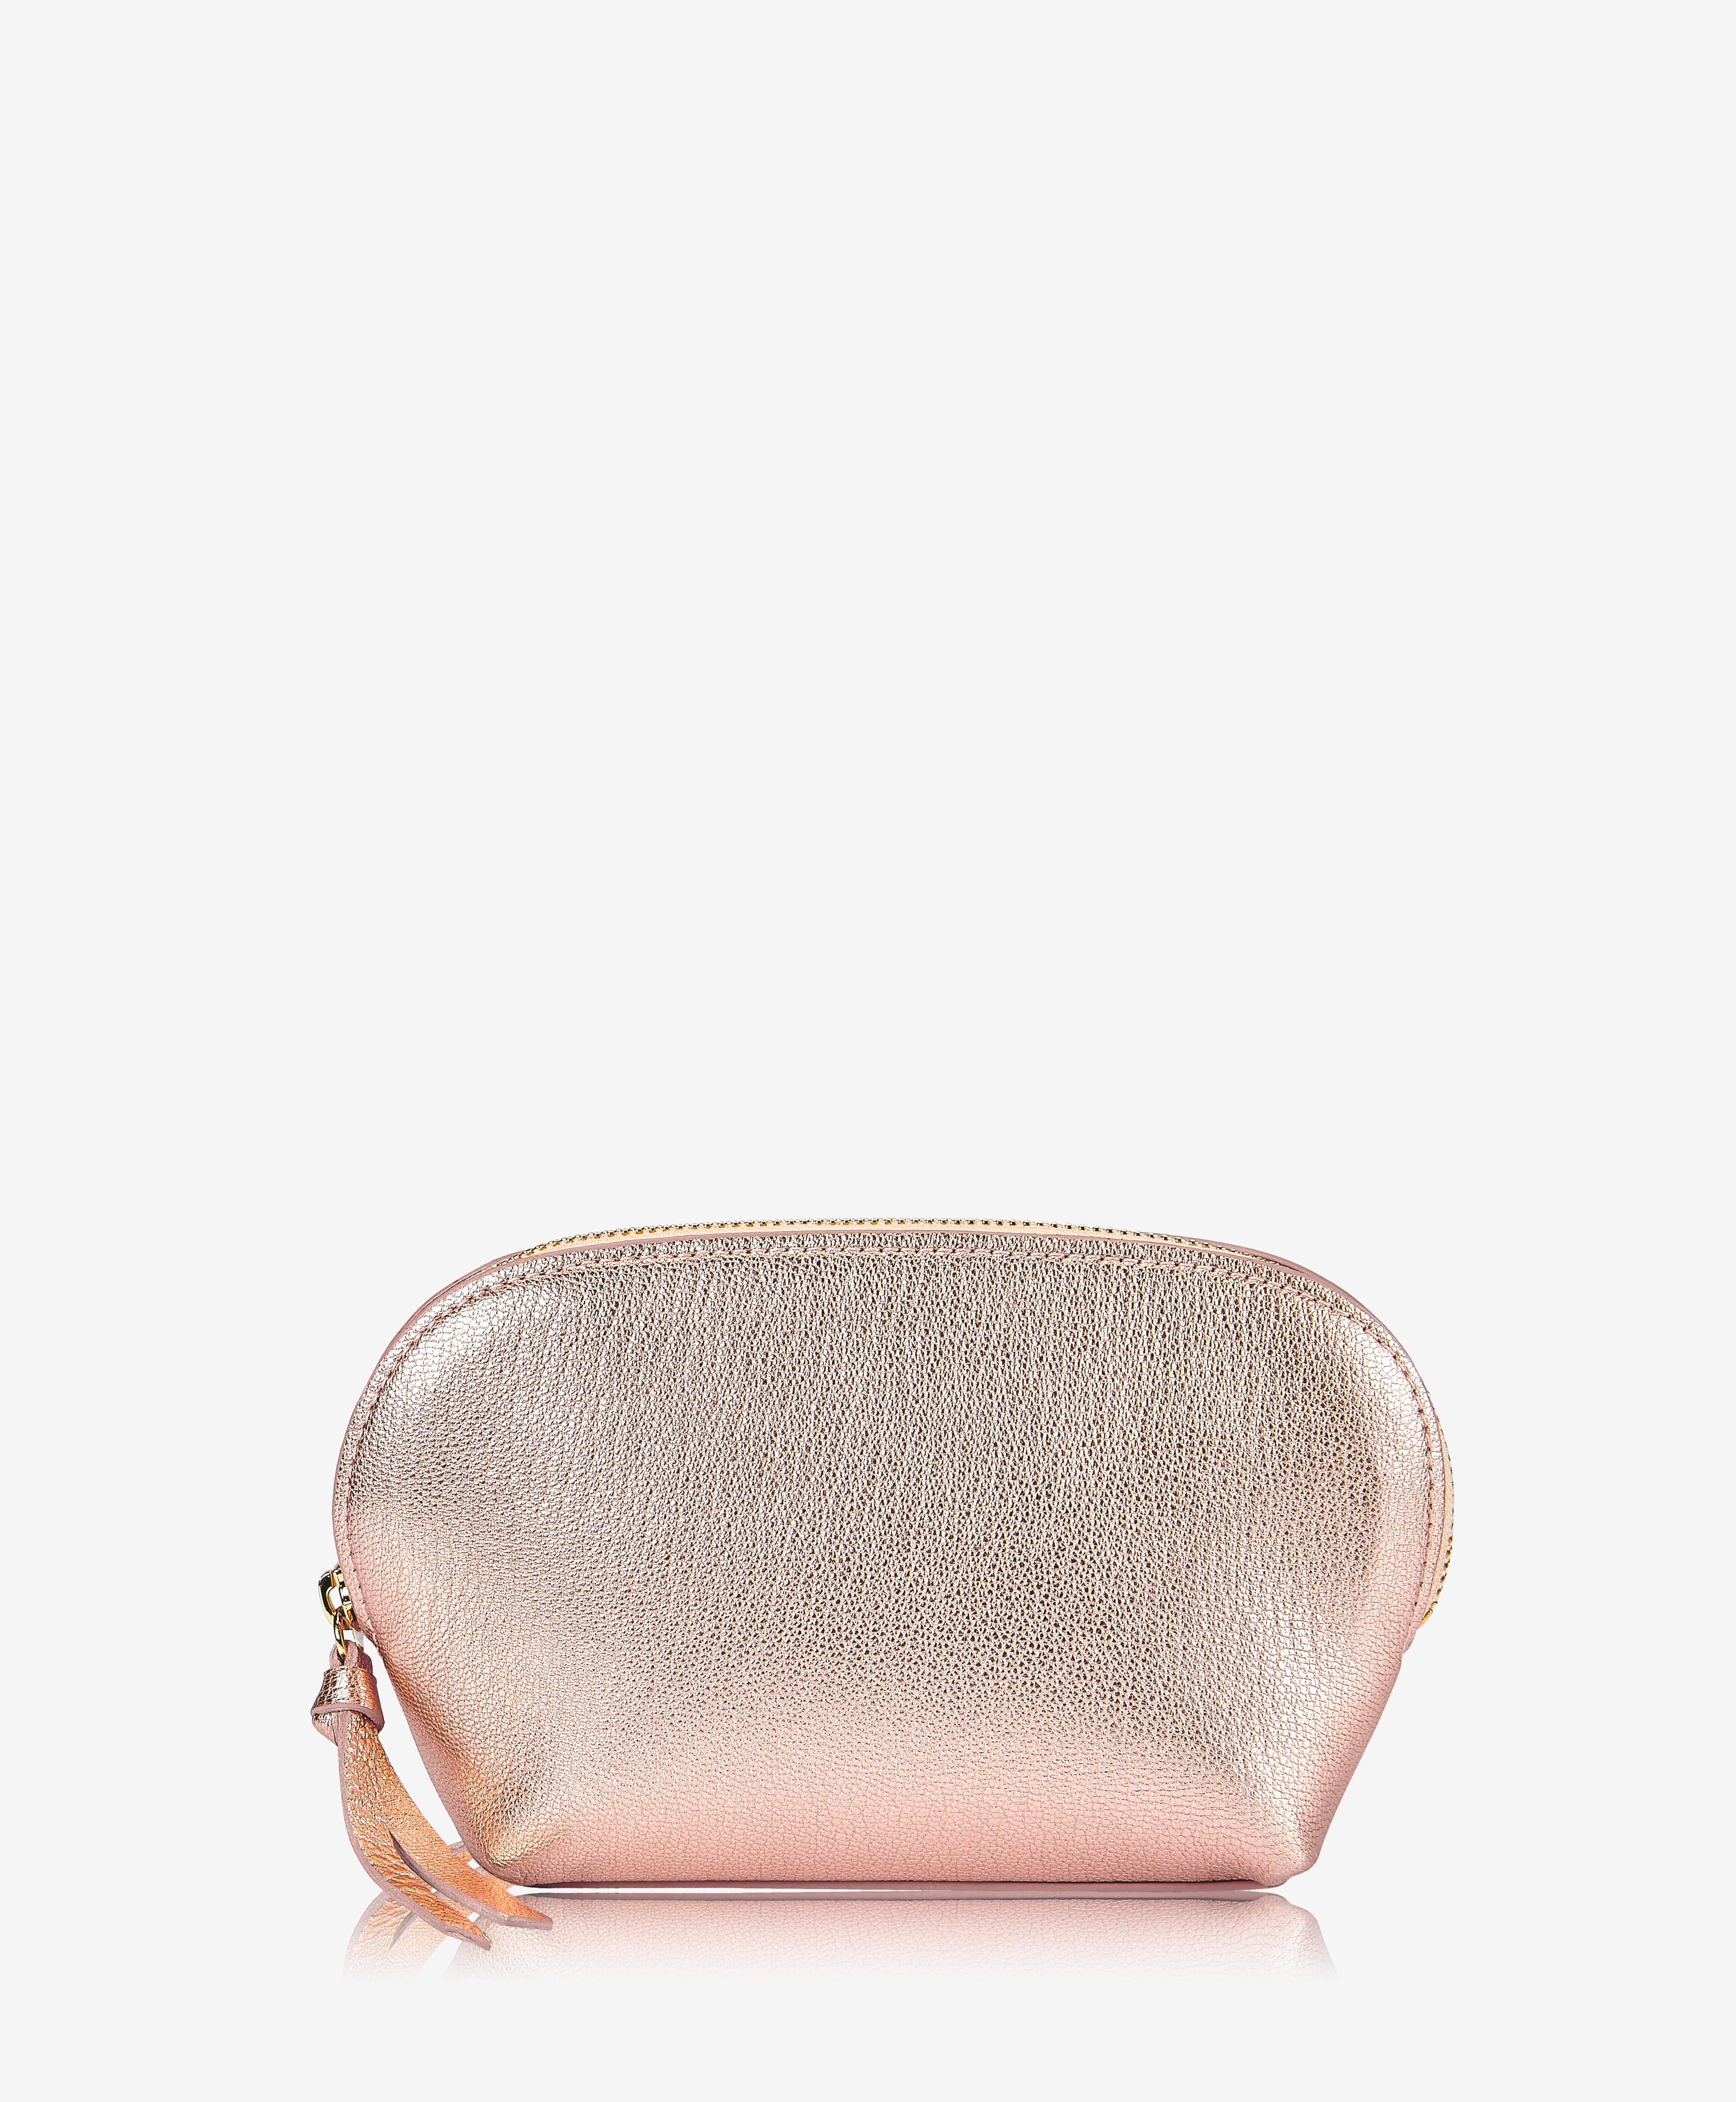 Purse in Rose Gold Leather — Ele Handmade Shoes